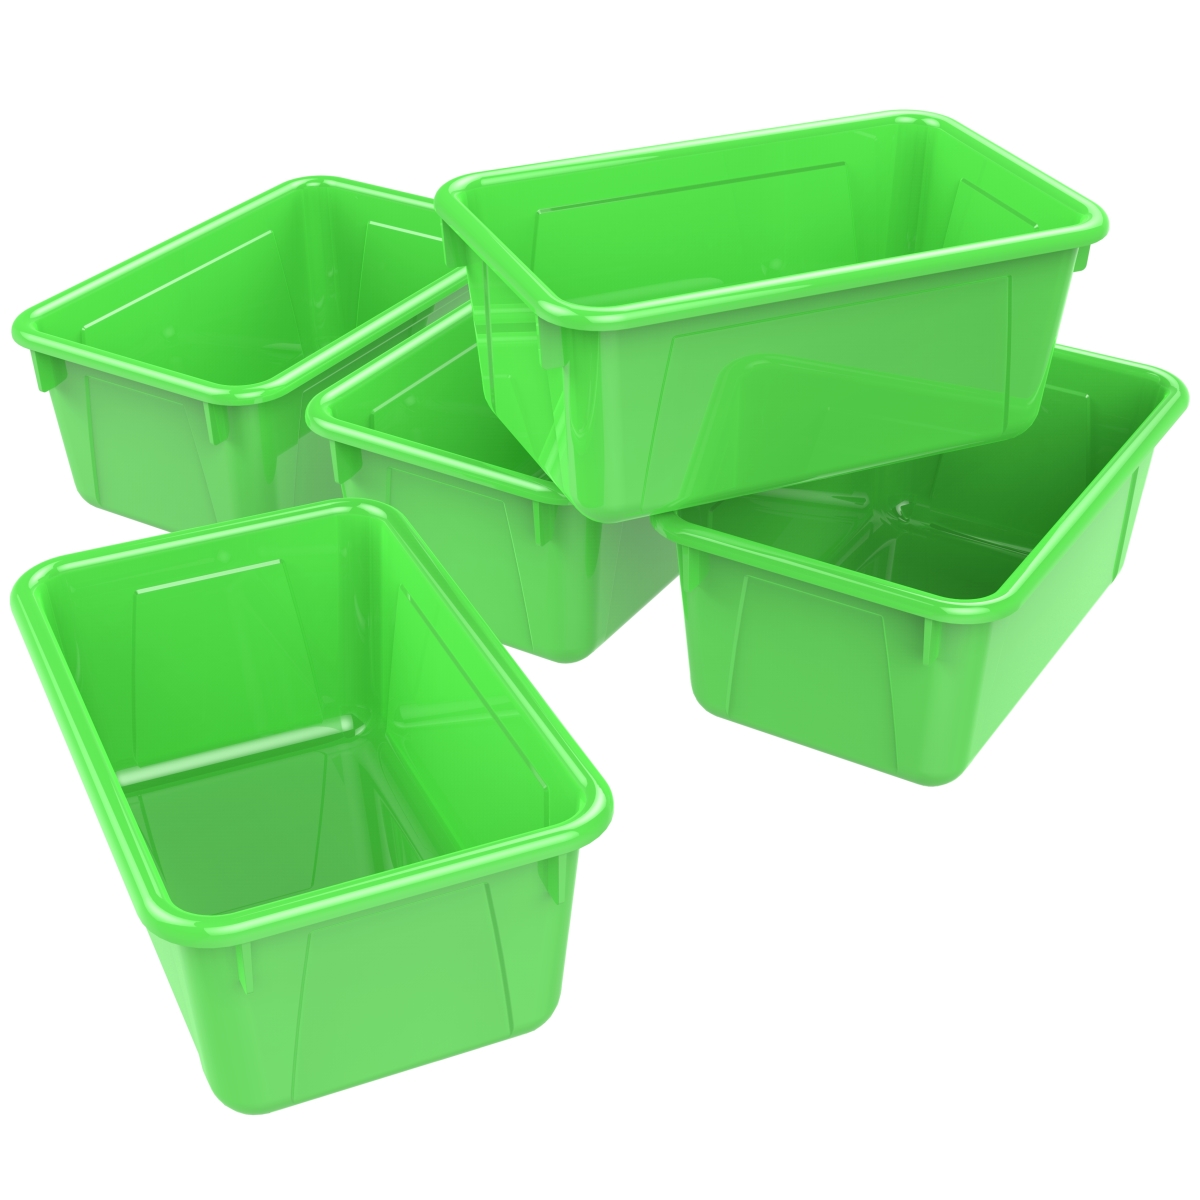 Classroom Small Cubby Bin, Green - Pack Of 5